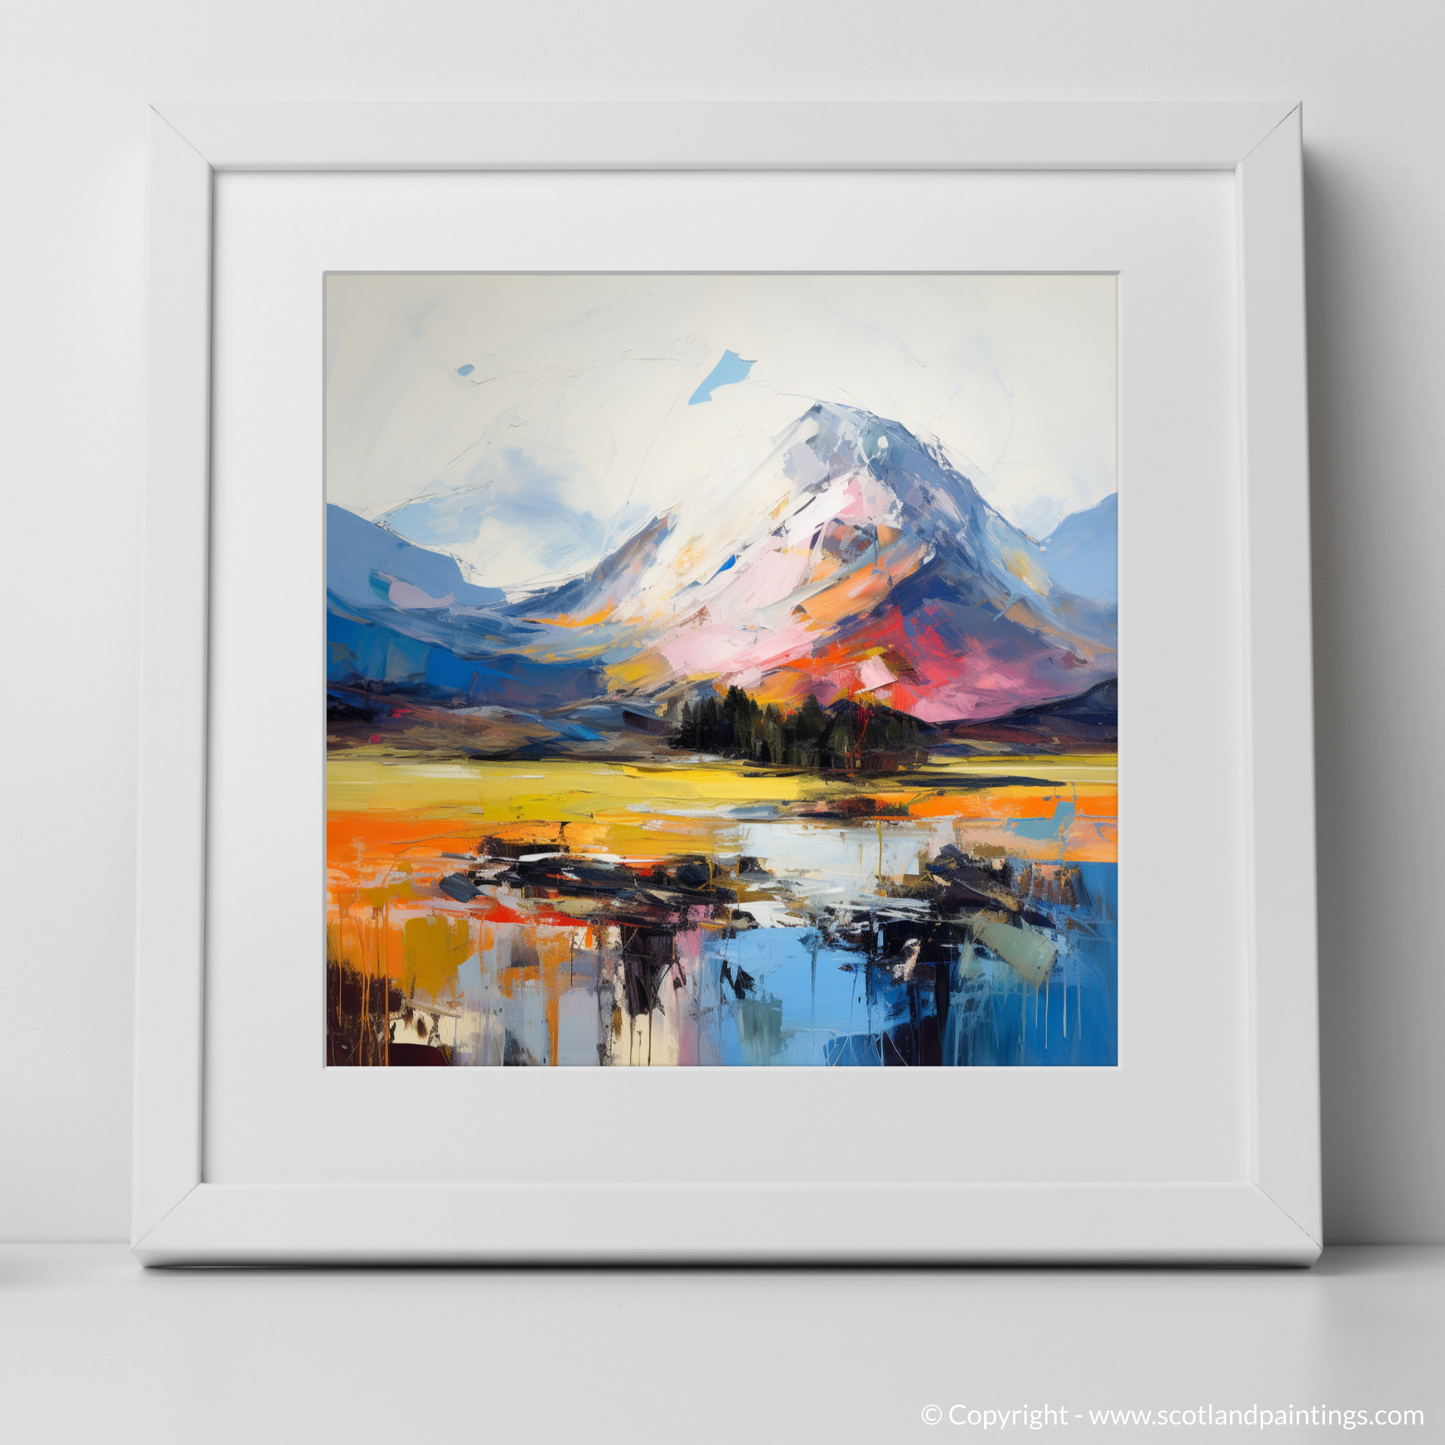 Art Print of Ben Nevis, Highlands with a white frame